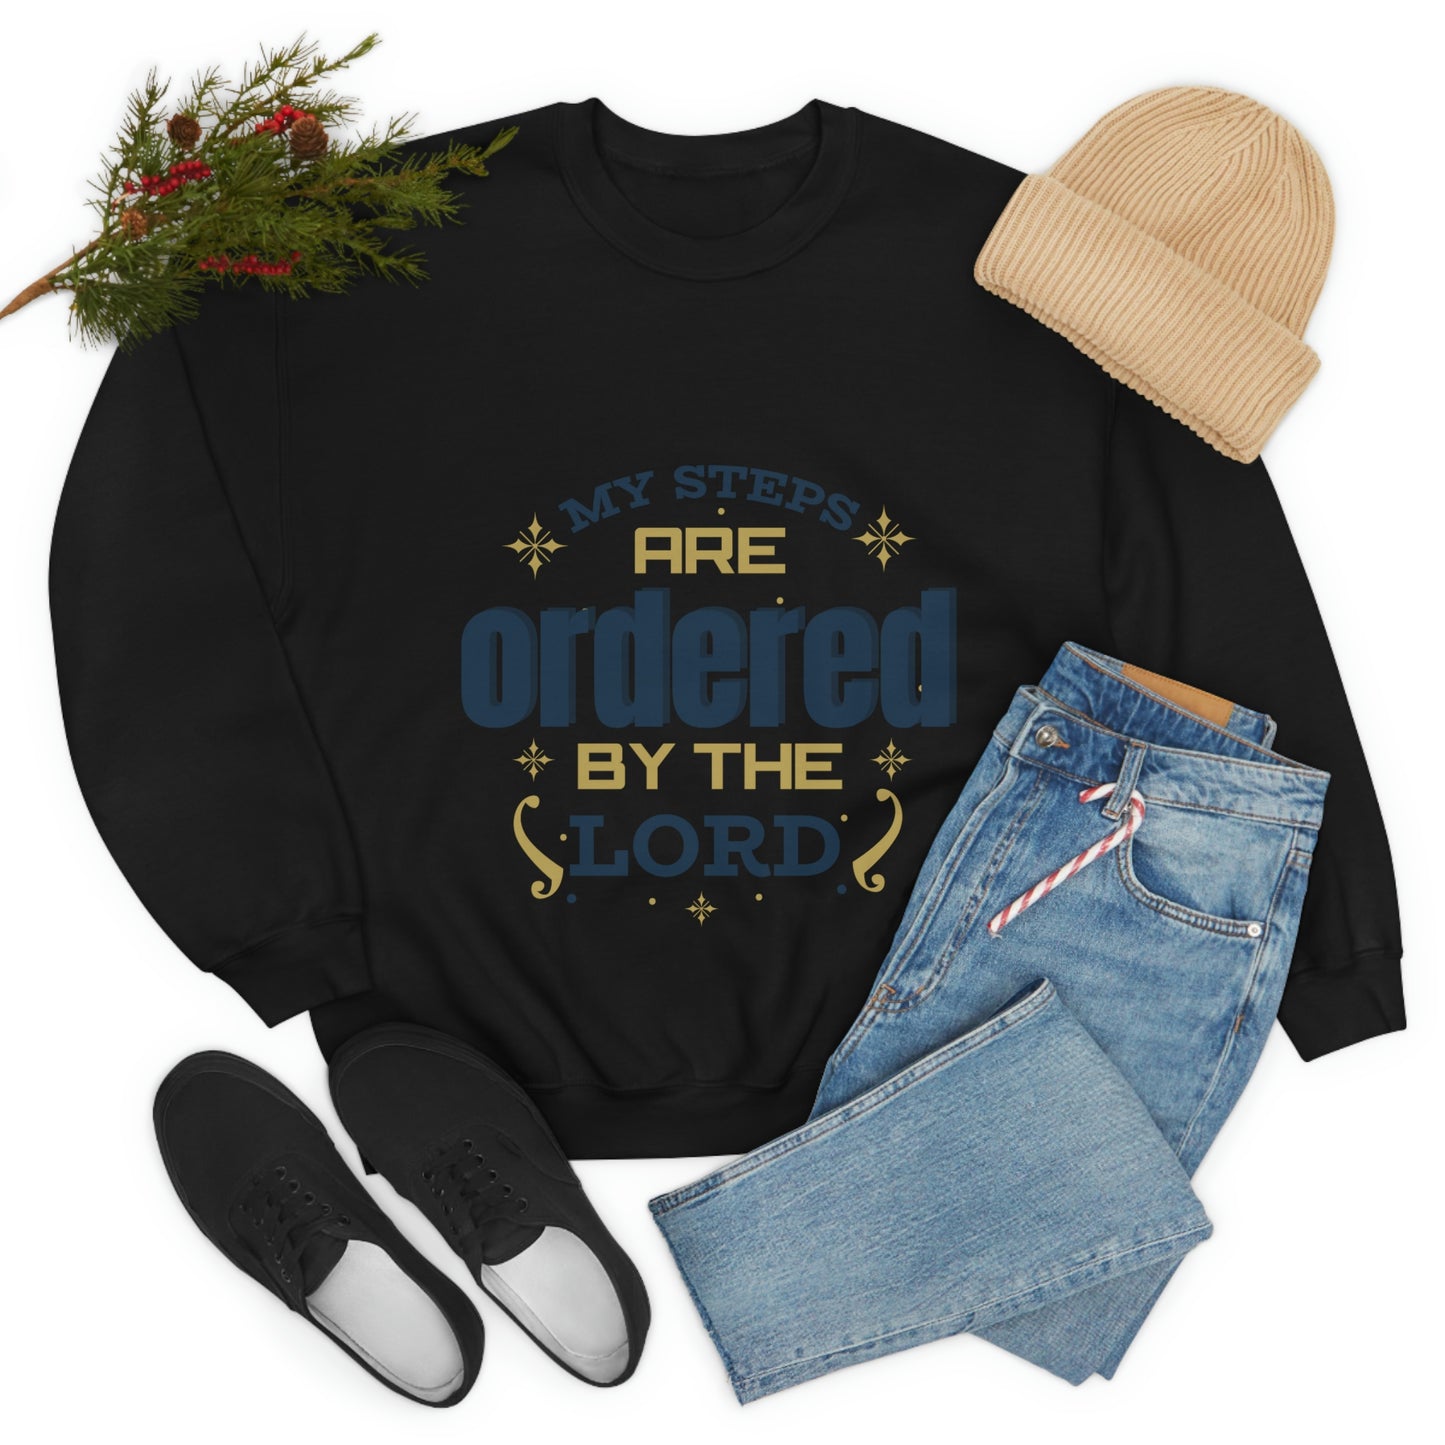 My Steps Are Ordered By The Lord Unisex Heavy Blend™ Crewneck Sweatshirt